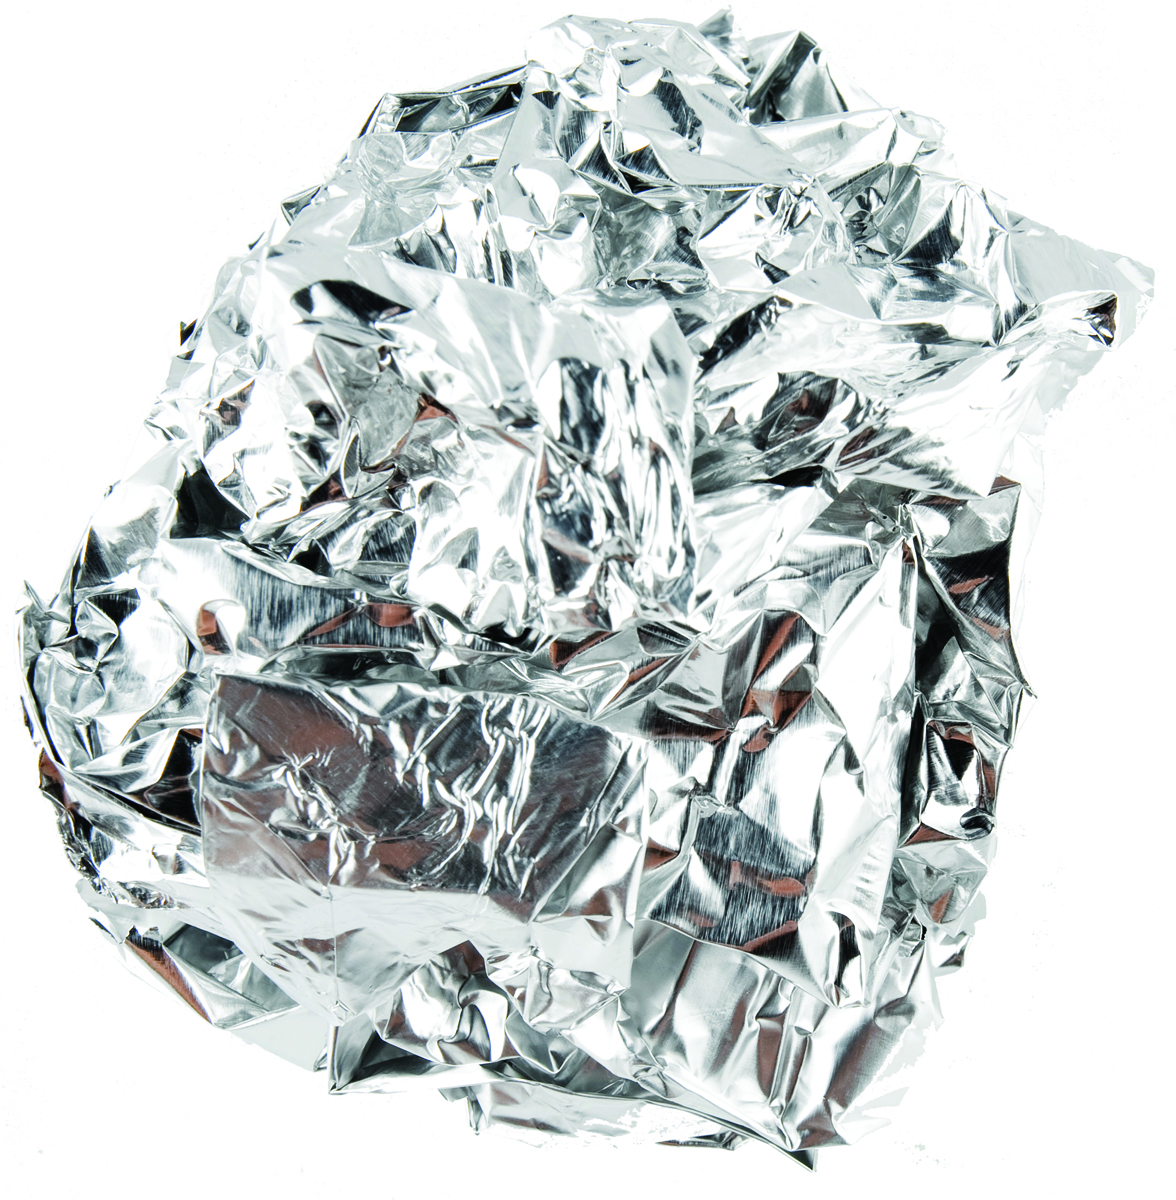 Soiled aluminium foil recycled into catalyst, Research